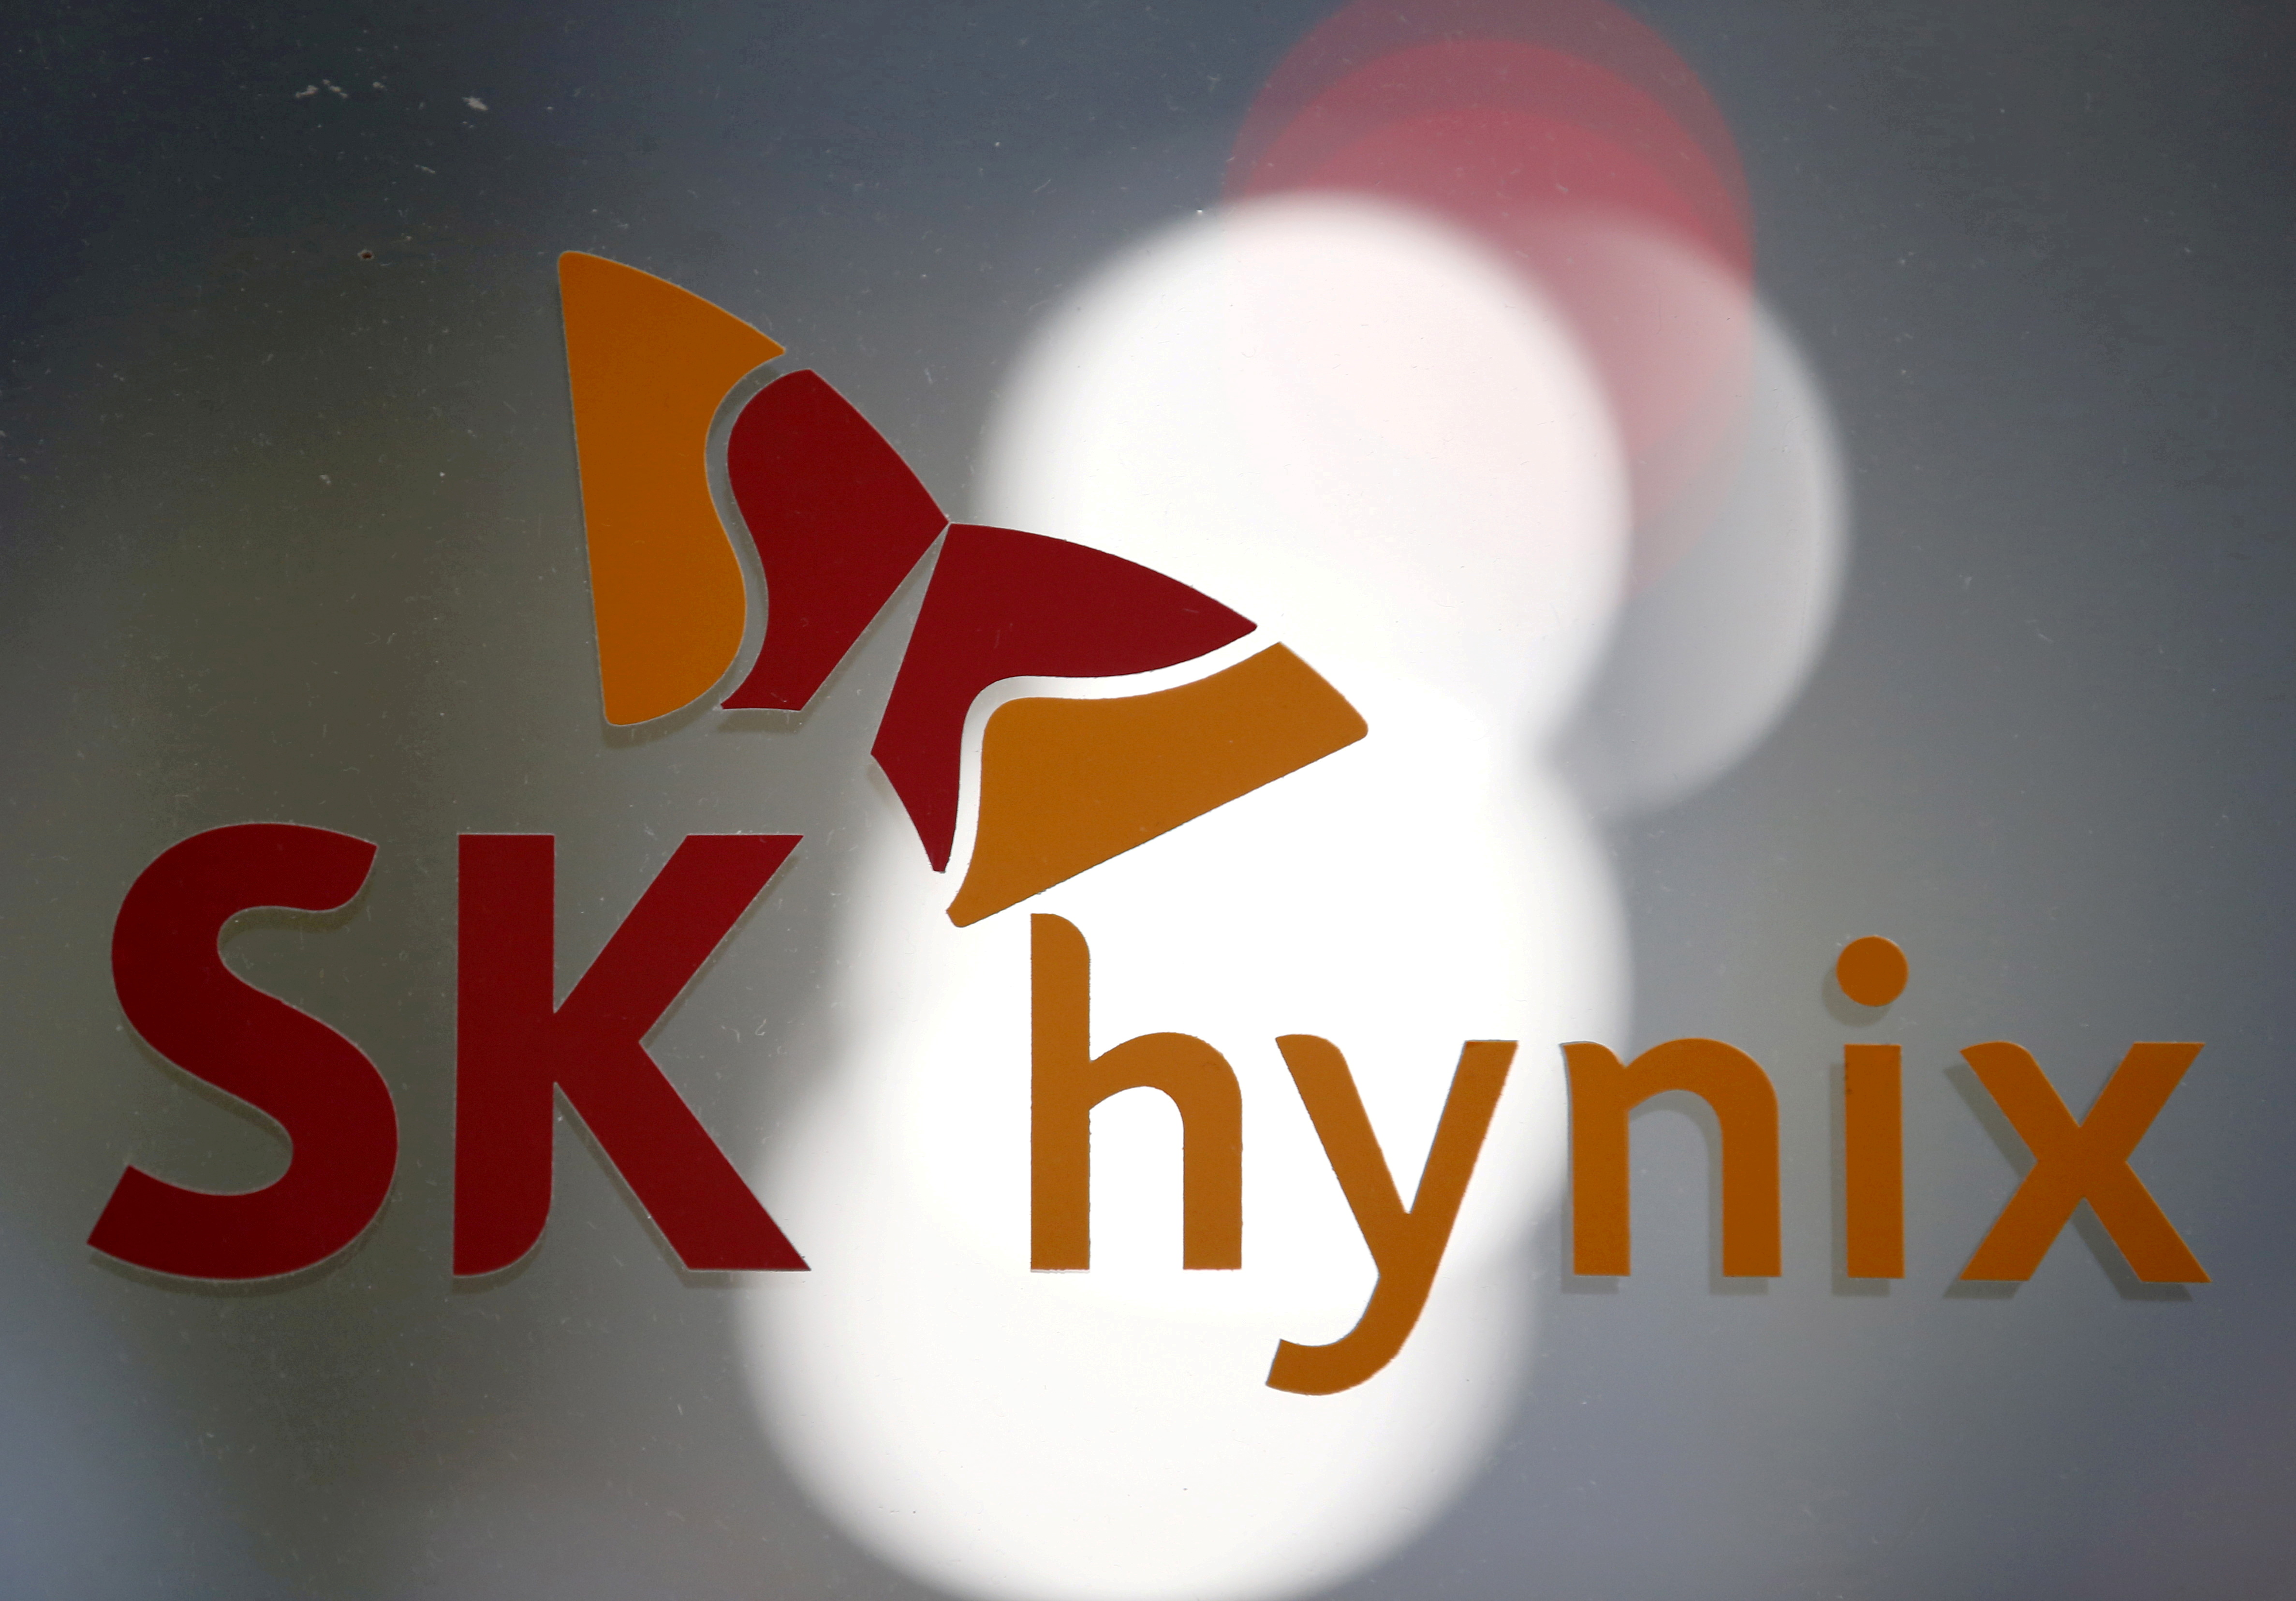 FILE PHOTO: The logo of SK Hynix is seen at its headquarters in Seongnam